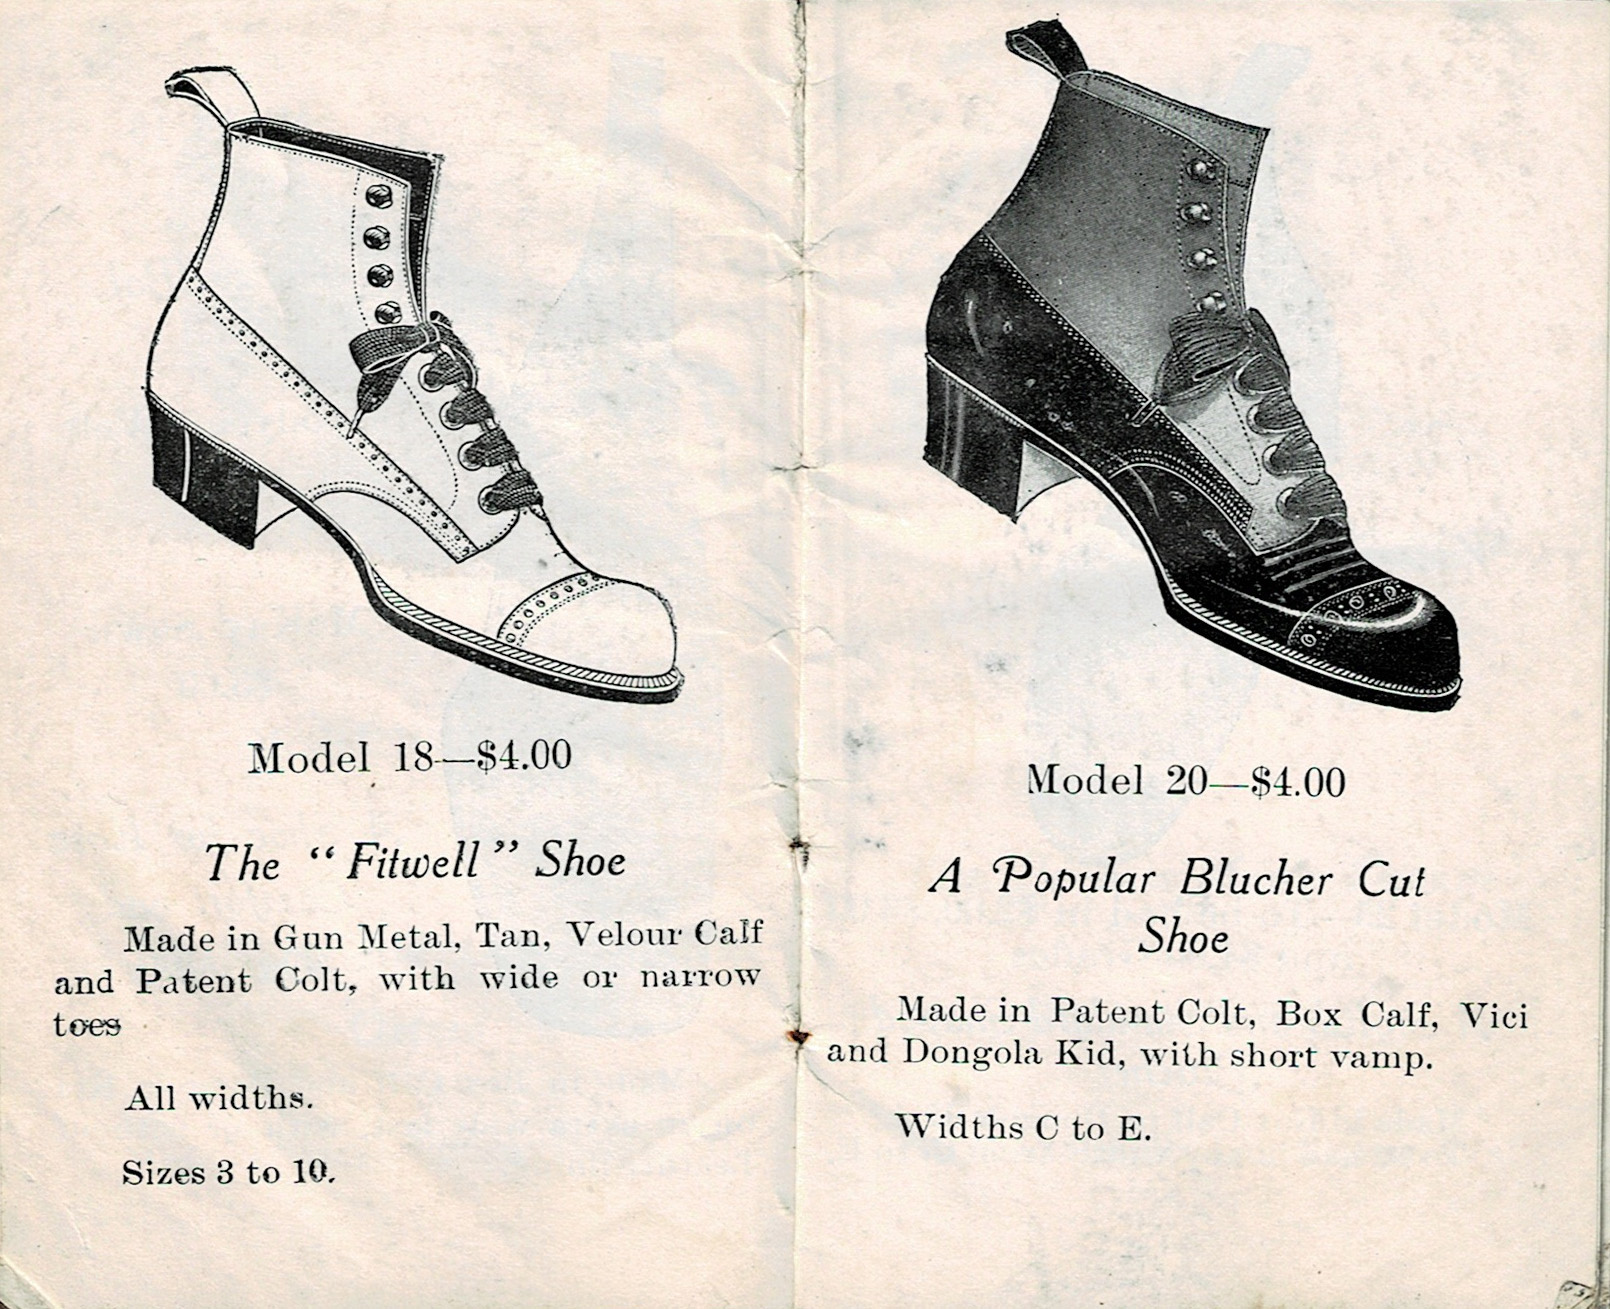 Model 18—$4.00

The "Fitwell" Shoe

Made in gun metal, tan, velour calf and patent colt, with wide or narrow toes.

All widths.

Sizes 8 to 10.

Model 20—$4.00

A popular blucher cut shoe.

Made in patent colt, box calf, Vici and Dongola Kid, with short vamp.

Widths C to E.